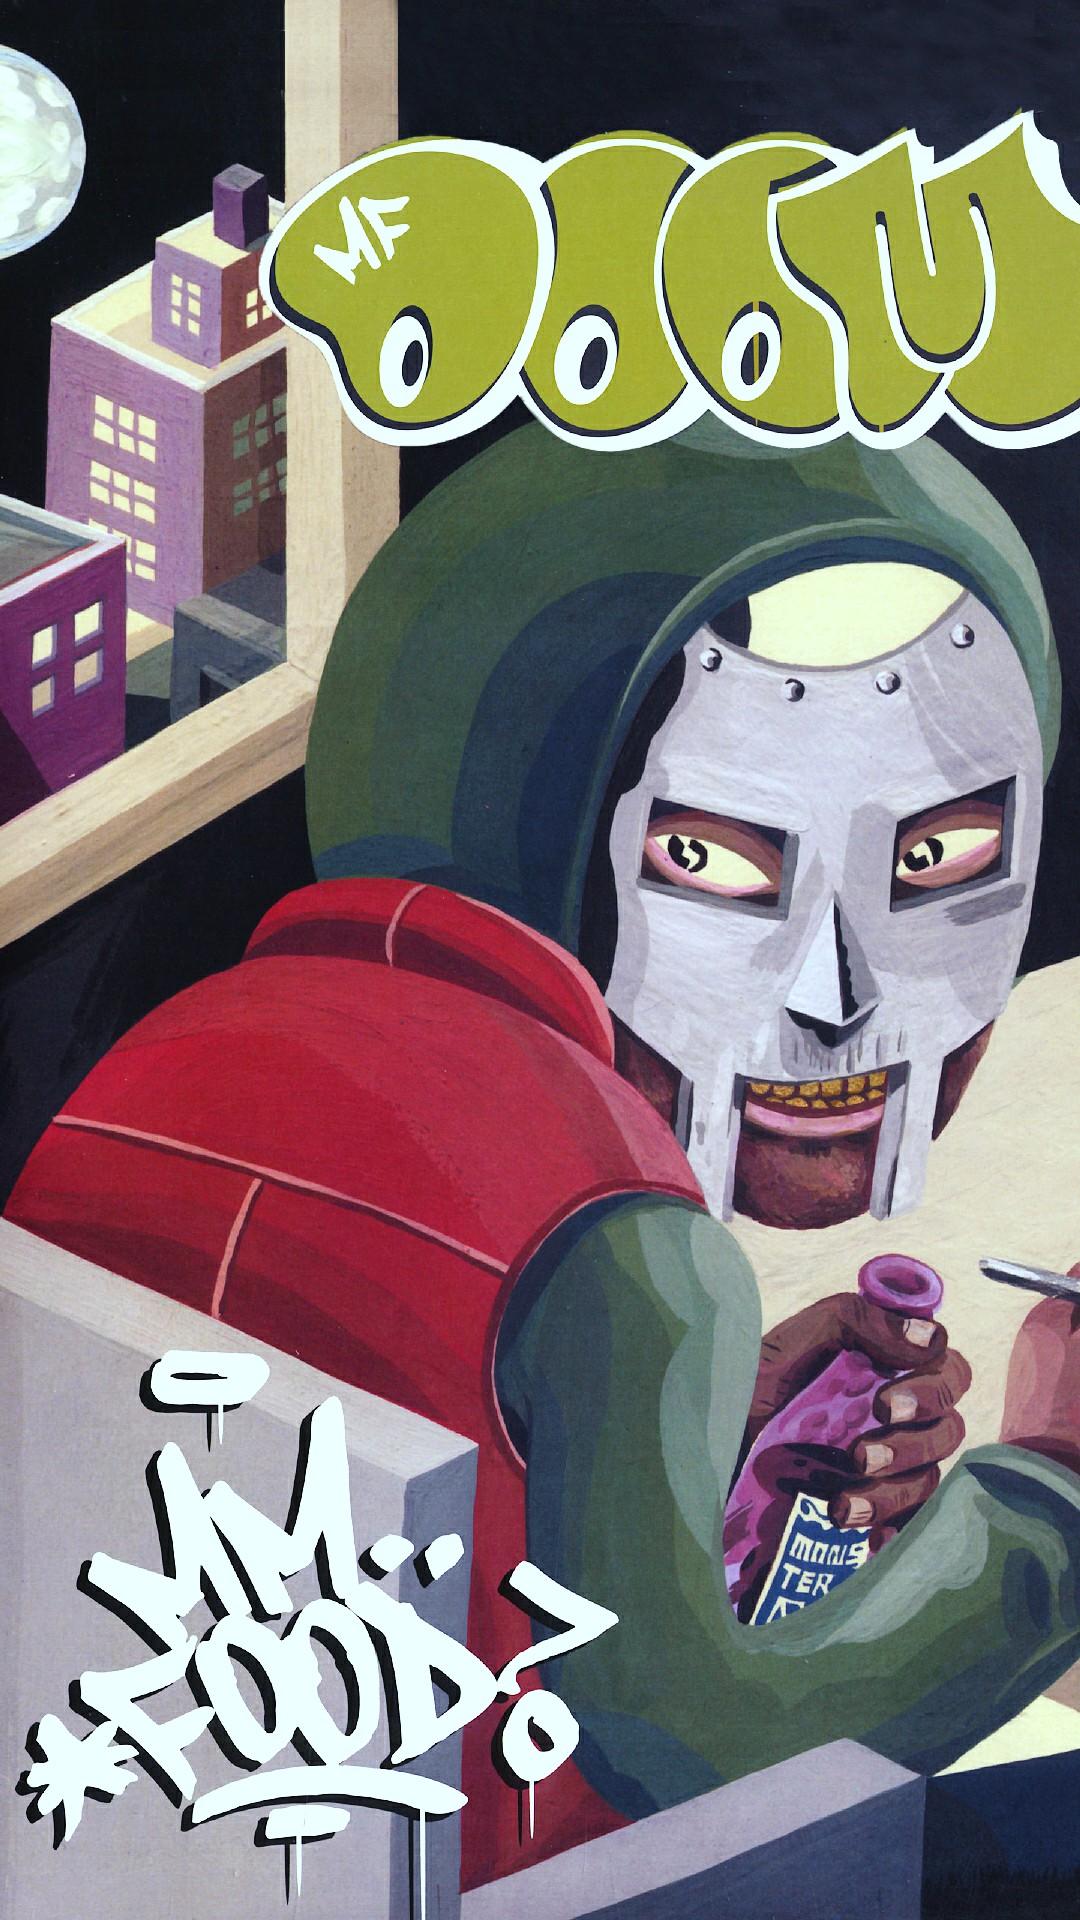 Mf Doom Phone Wallpapers Wallpaper Cave Images, Photos, Reviews